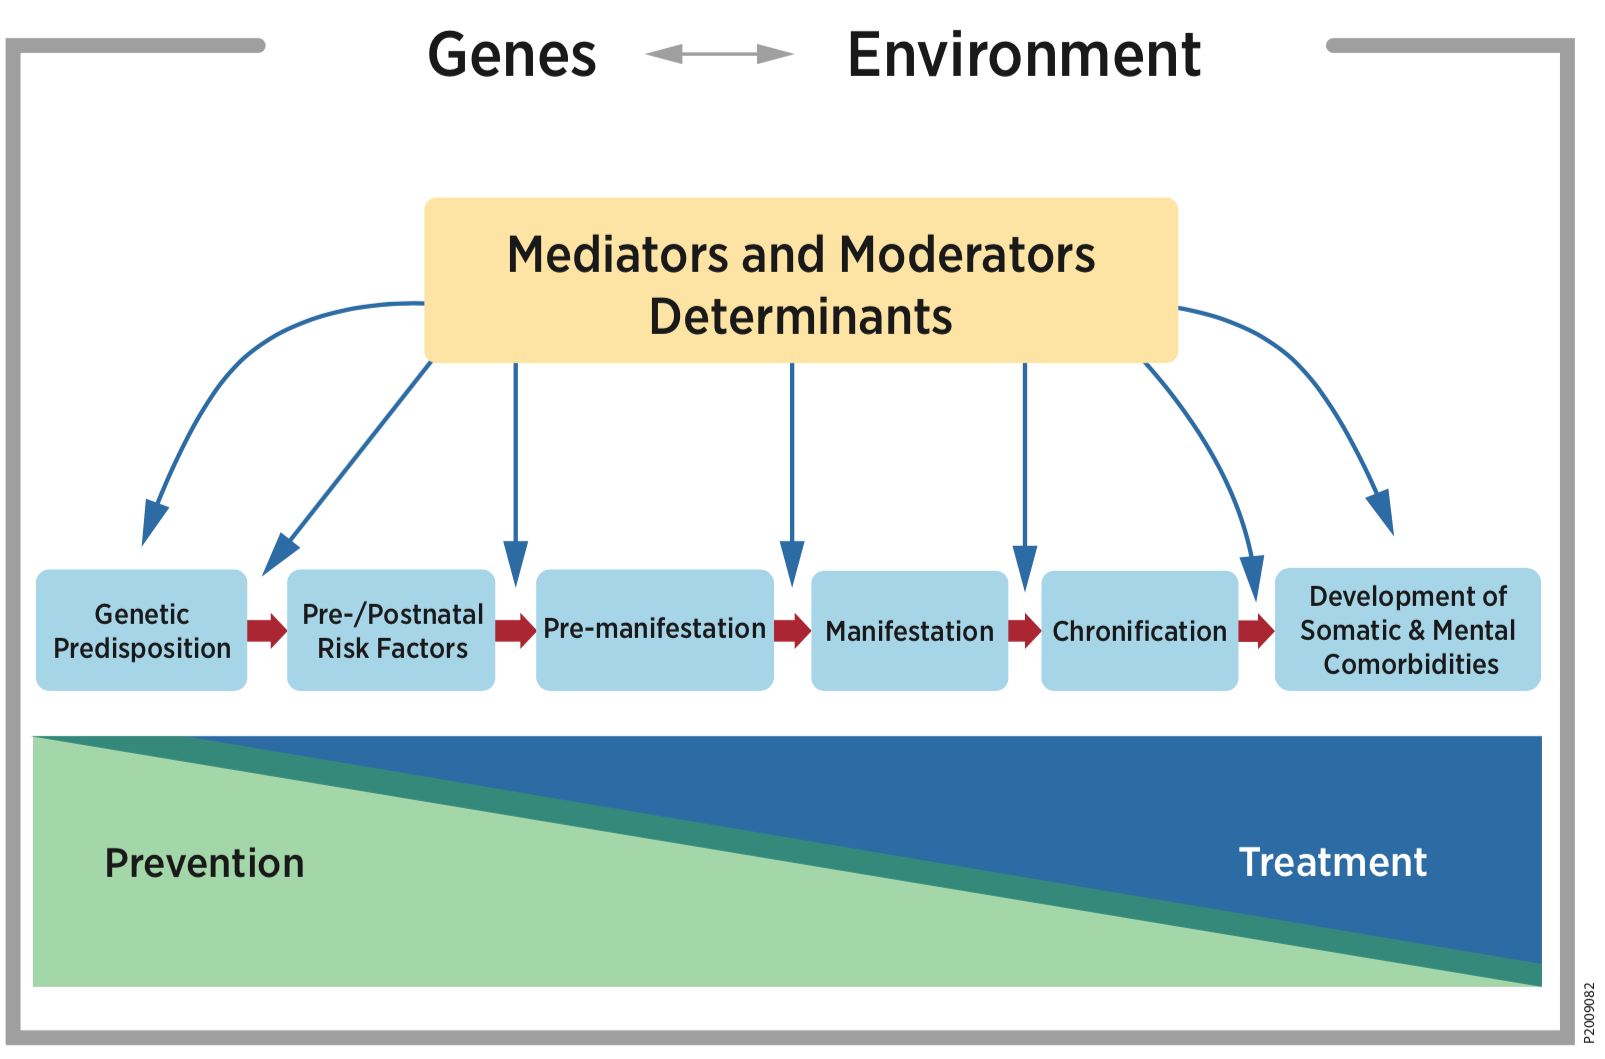 Identification of mediators and moderators that determine the origins and the transition state of diseases from predisposition and manifestation to chronification and co-morbidities. INTERPLAY aims to implement novel preventive and treatment strategies to interrupt this continuum.